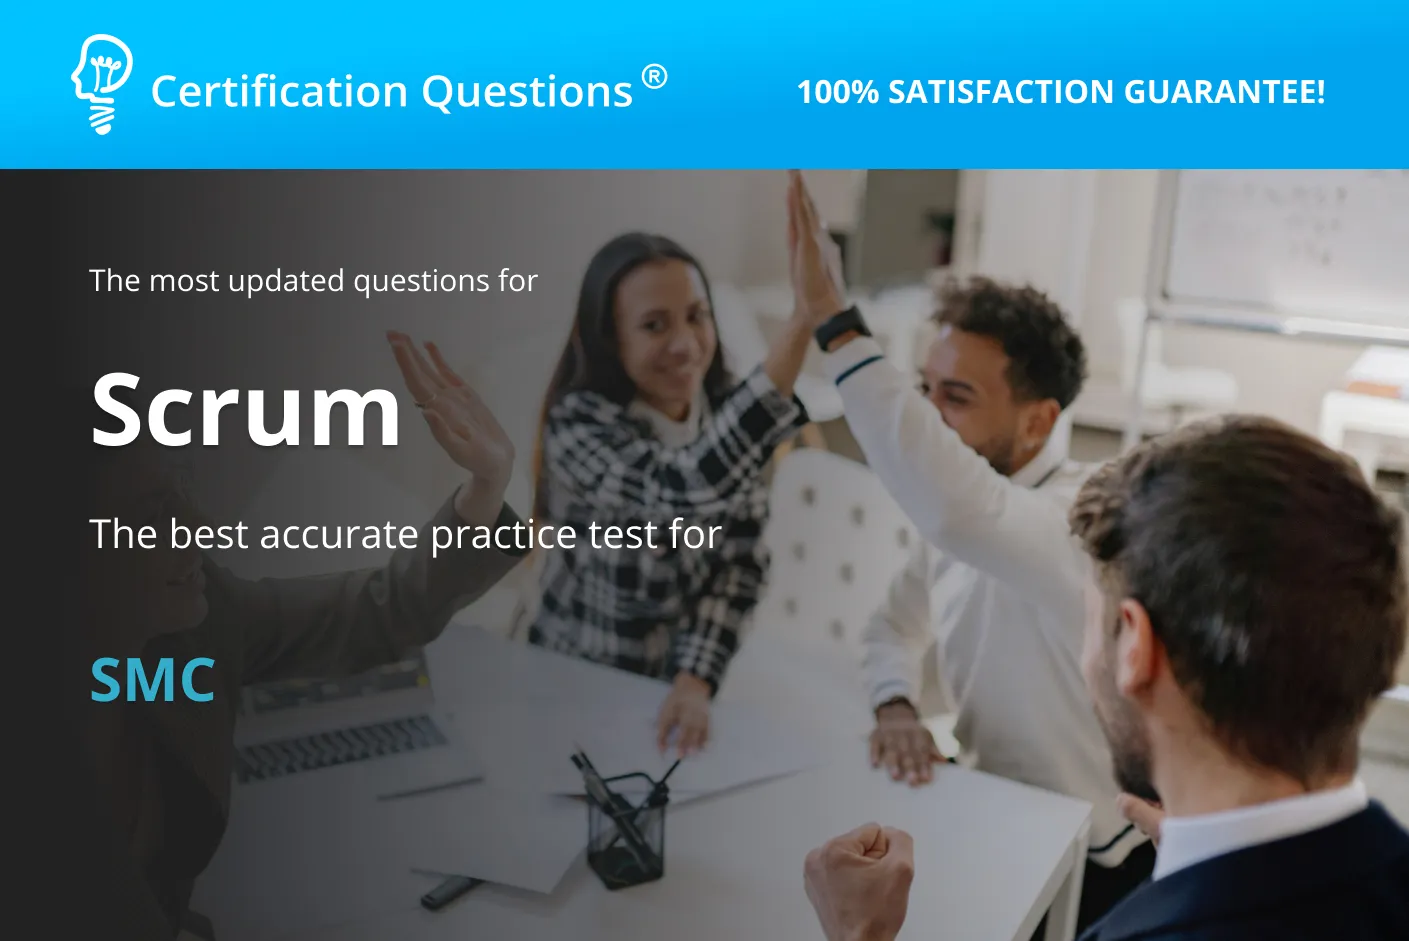 This image indicates the certified scrum master certification practice test